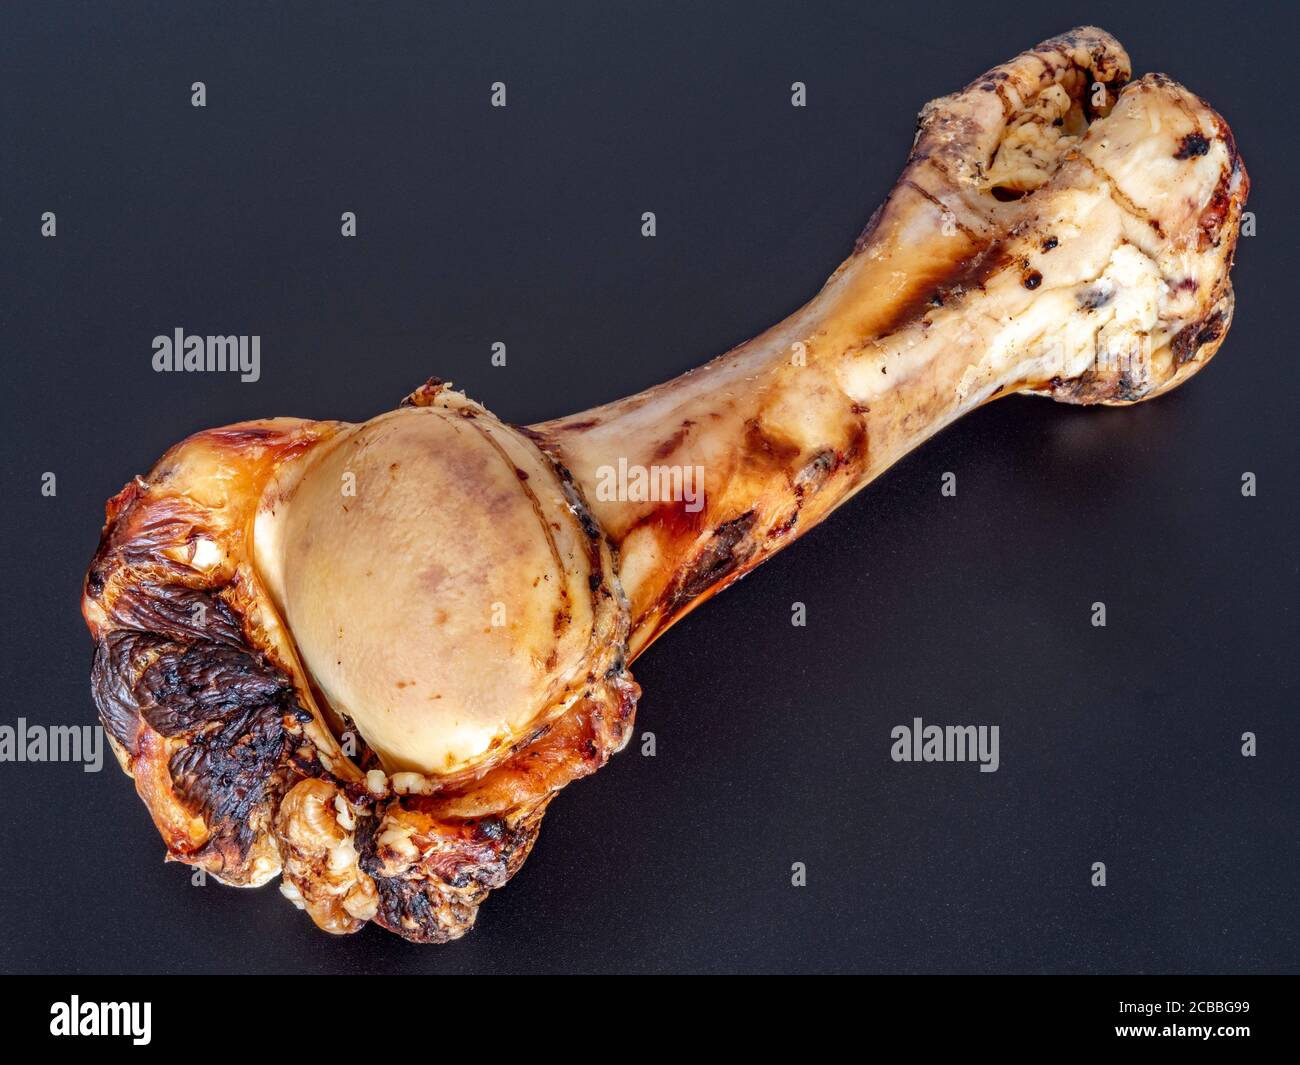 Closeup isolated shot of a giant roasted beef leg bone – sold as a natural meaty treat for a pet dog to chew on. Stock Photo